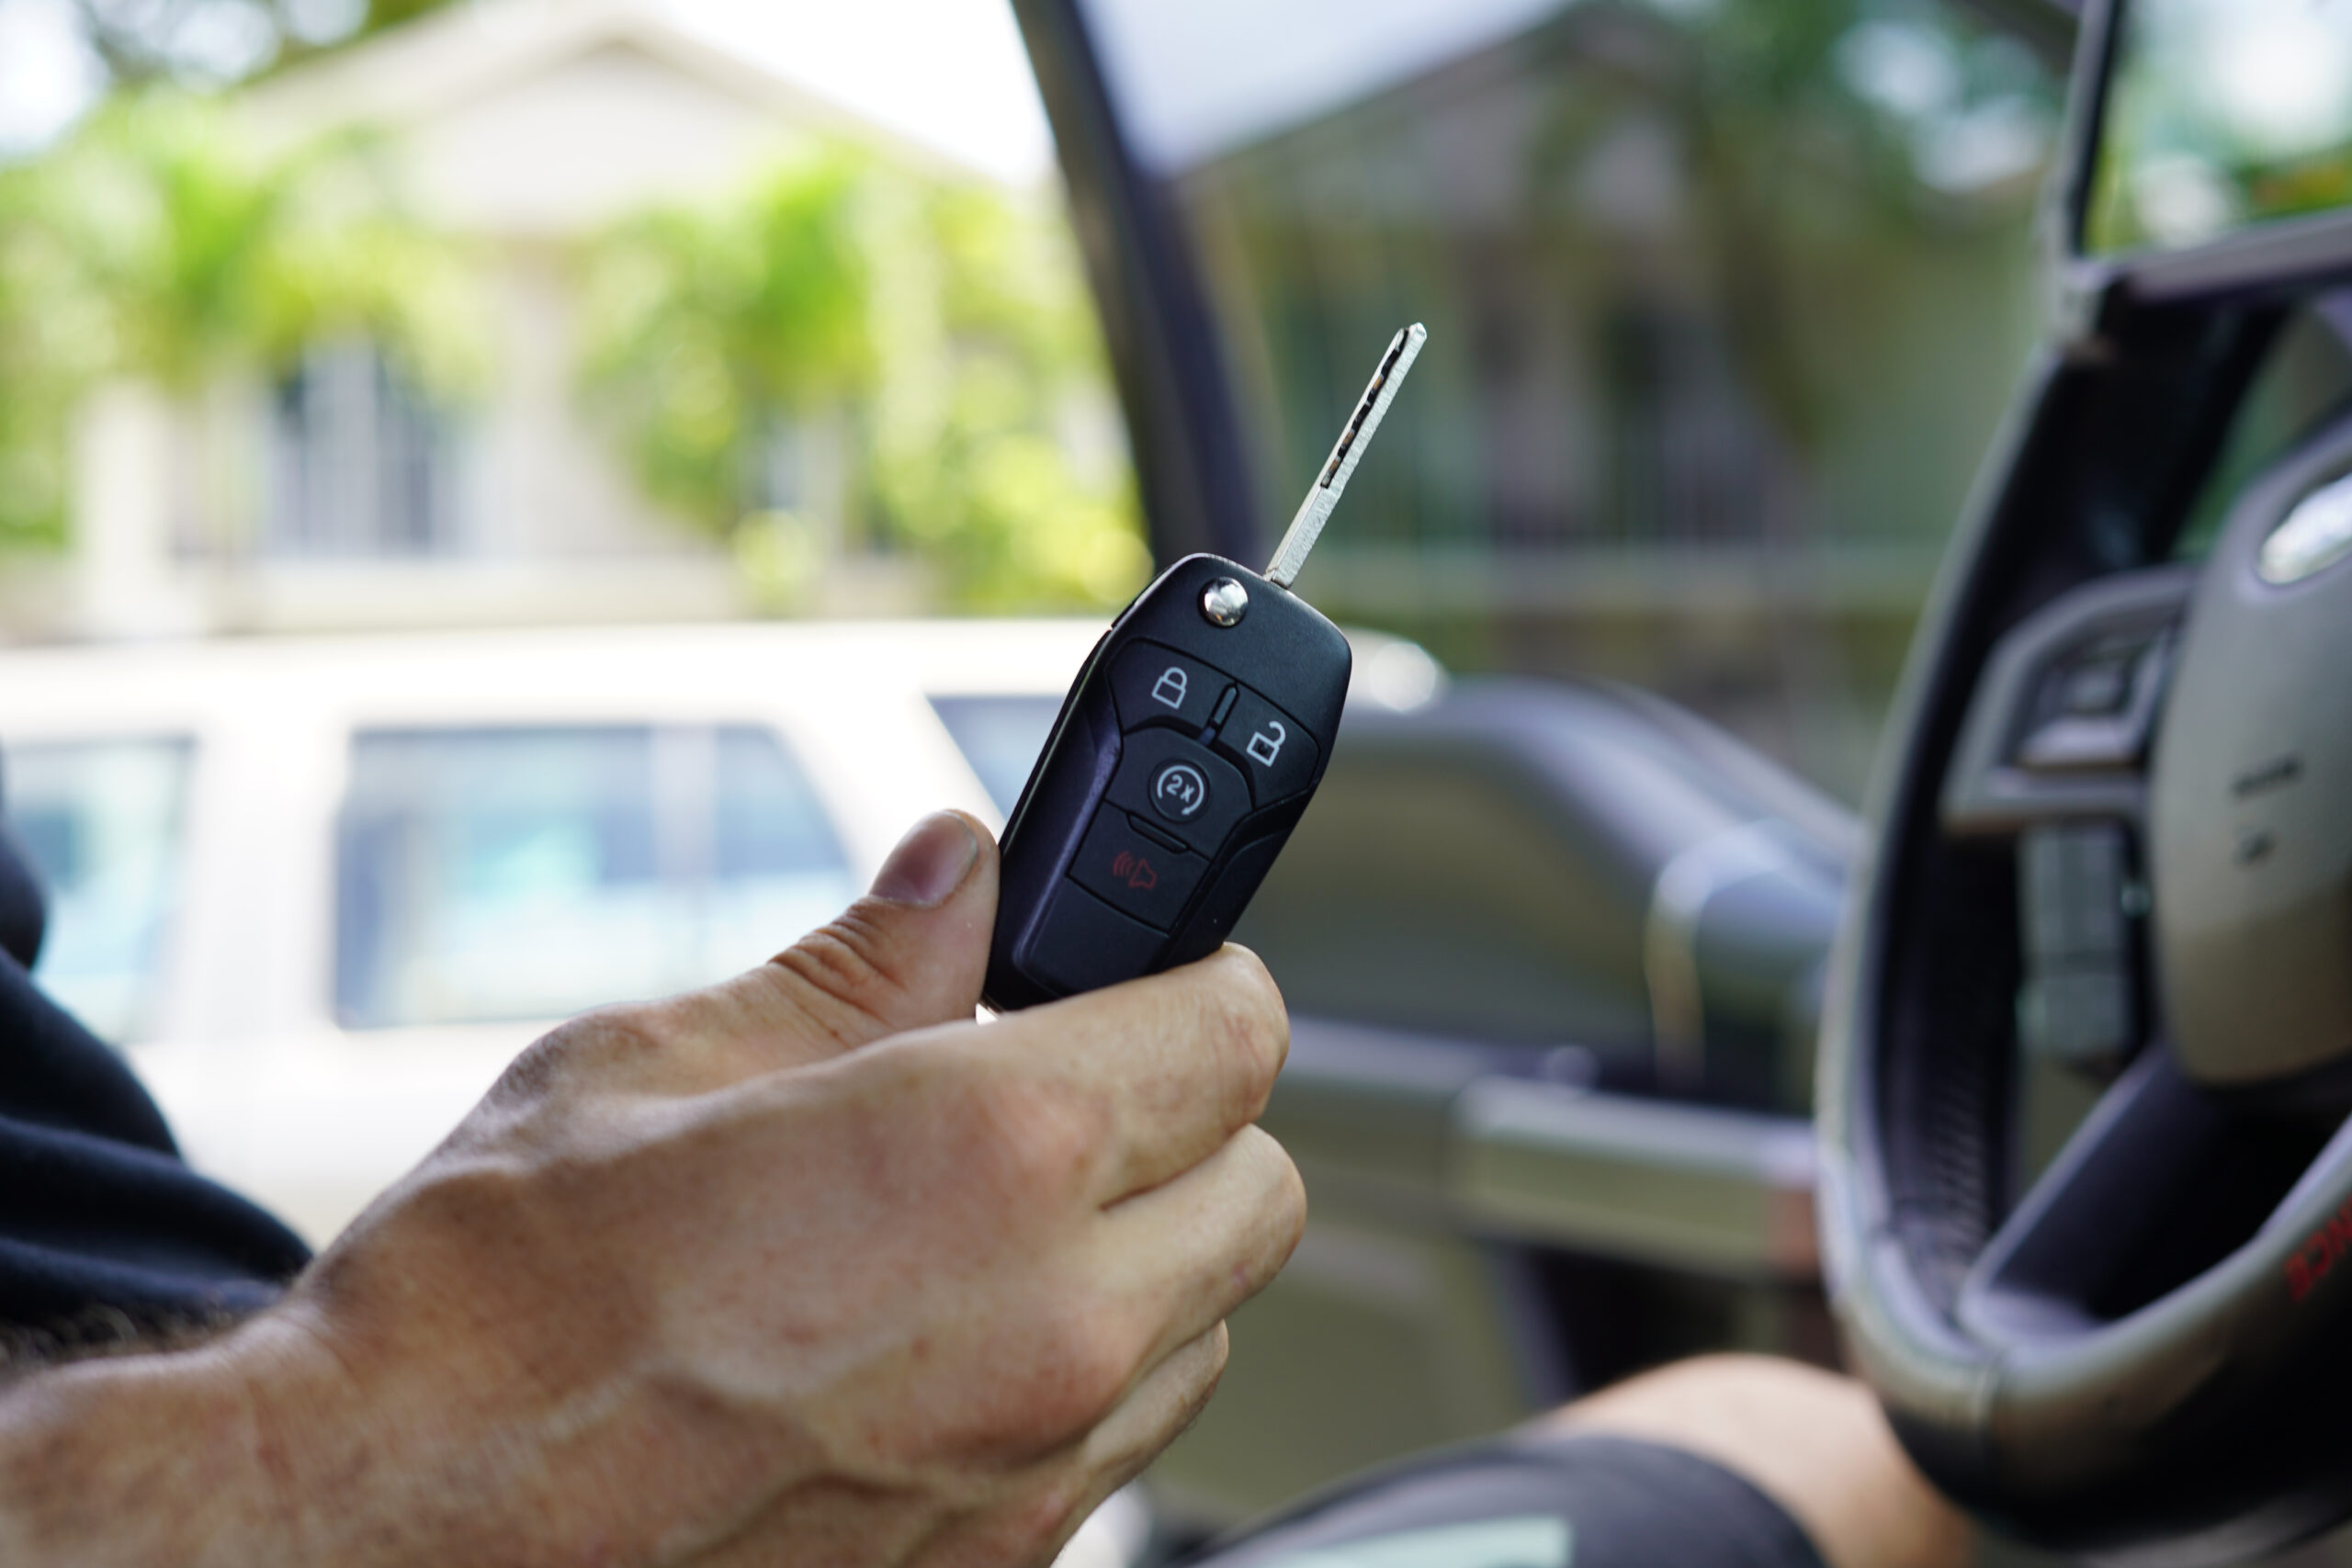 Automotive Locksmith Services: Key Duplication, Emergency Lockout Assistance, Ignition System Repair, and More